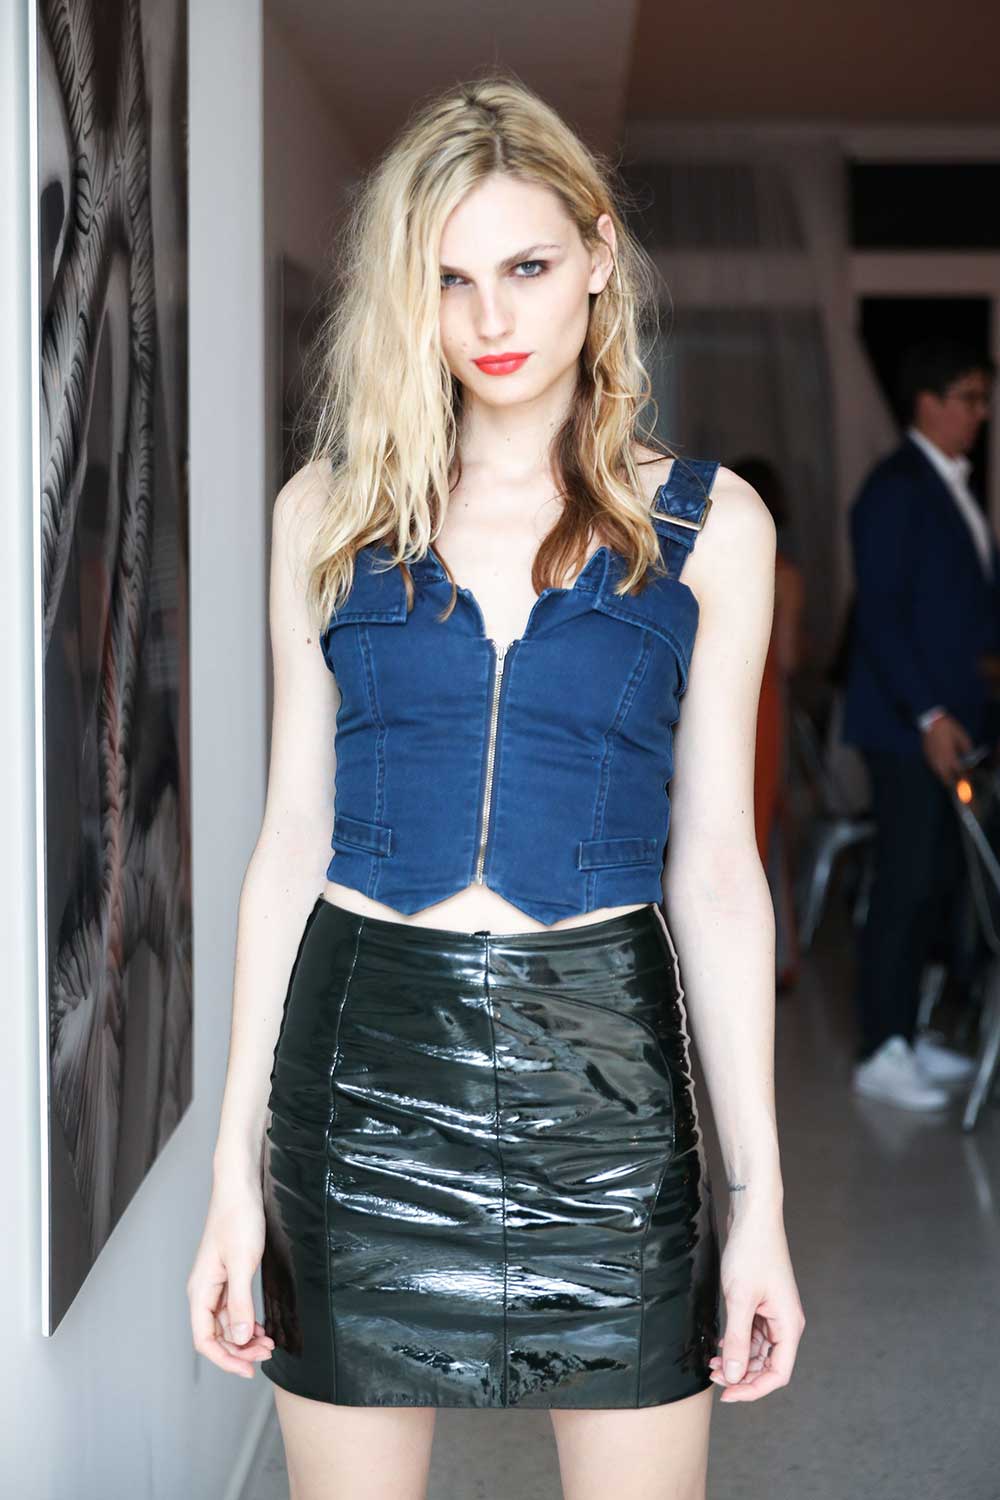 Andreja Pejic attends Adidas x Parley x Surface 2016 Dinner